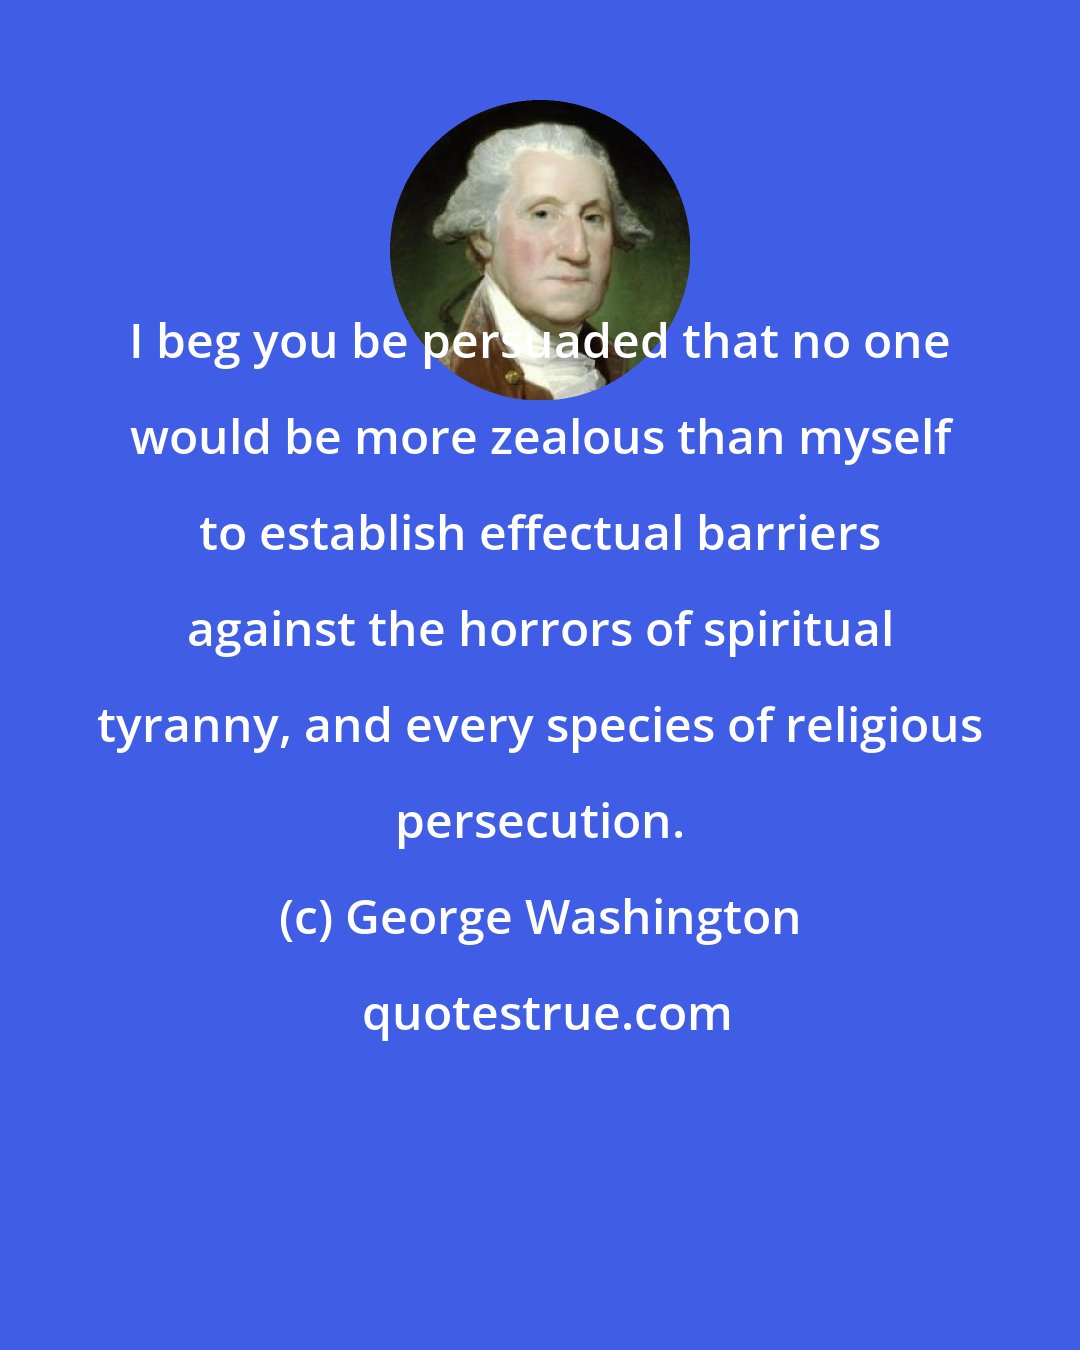 George Washington: I beg you be persuaded that no one would be more zealous than myself to establish effectual barriers against the horrors of spiritual tyranny, and every species of religious persecution.